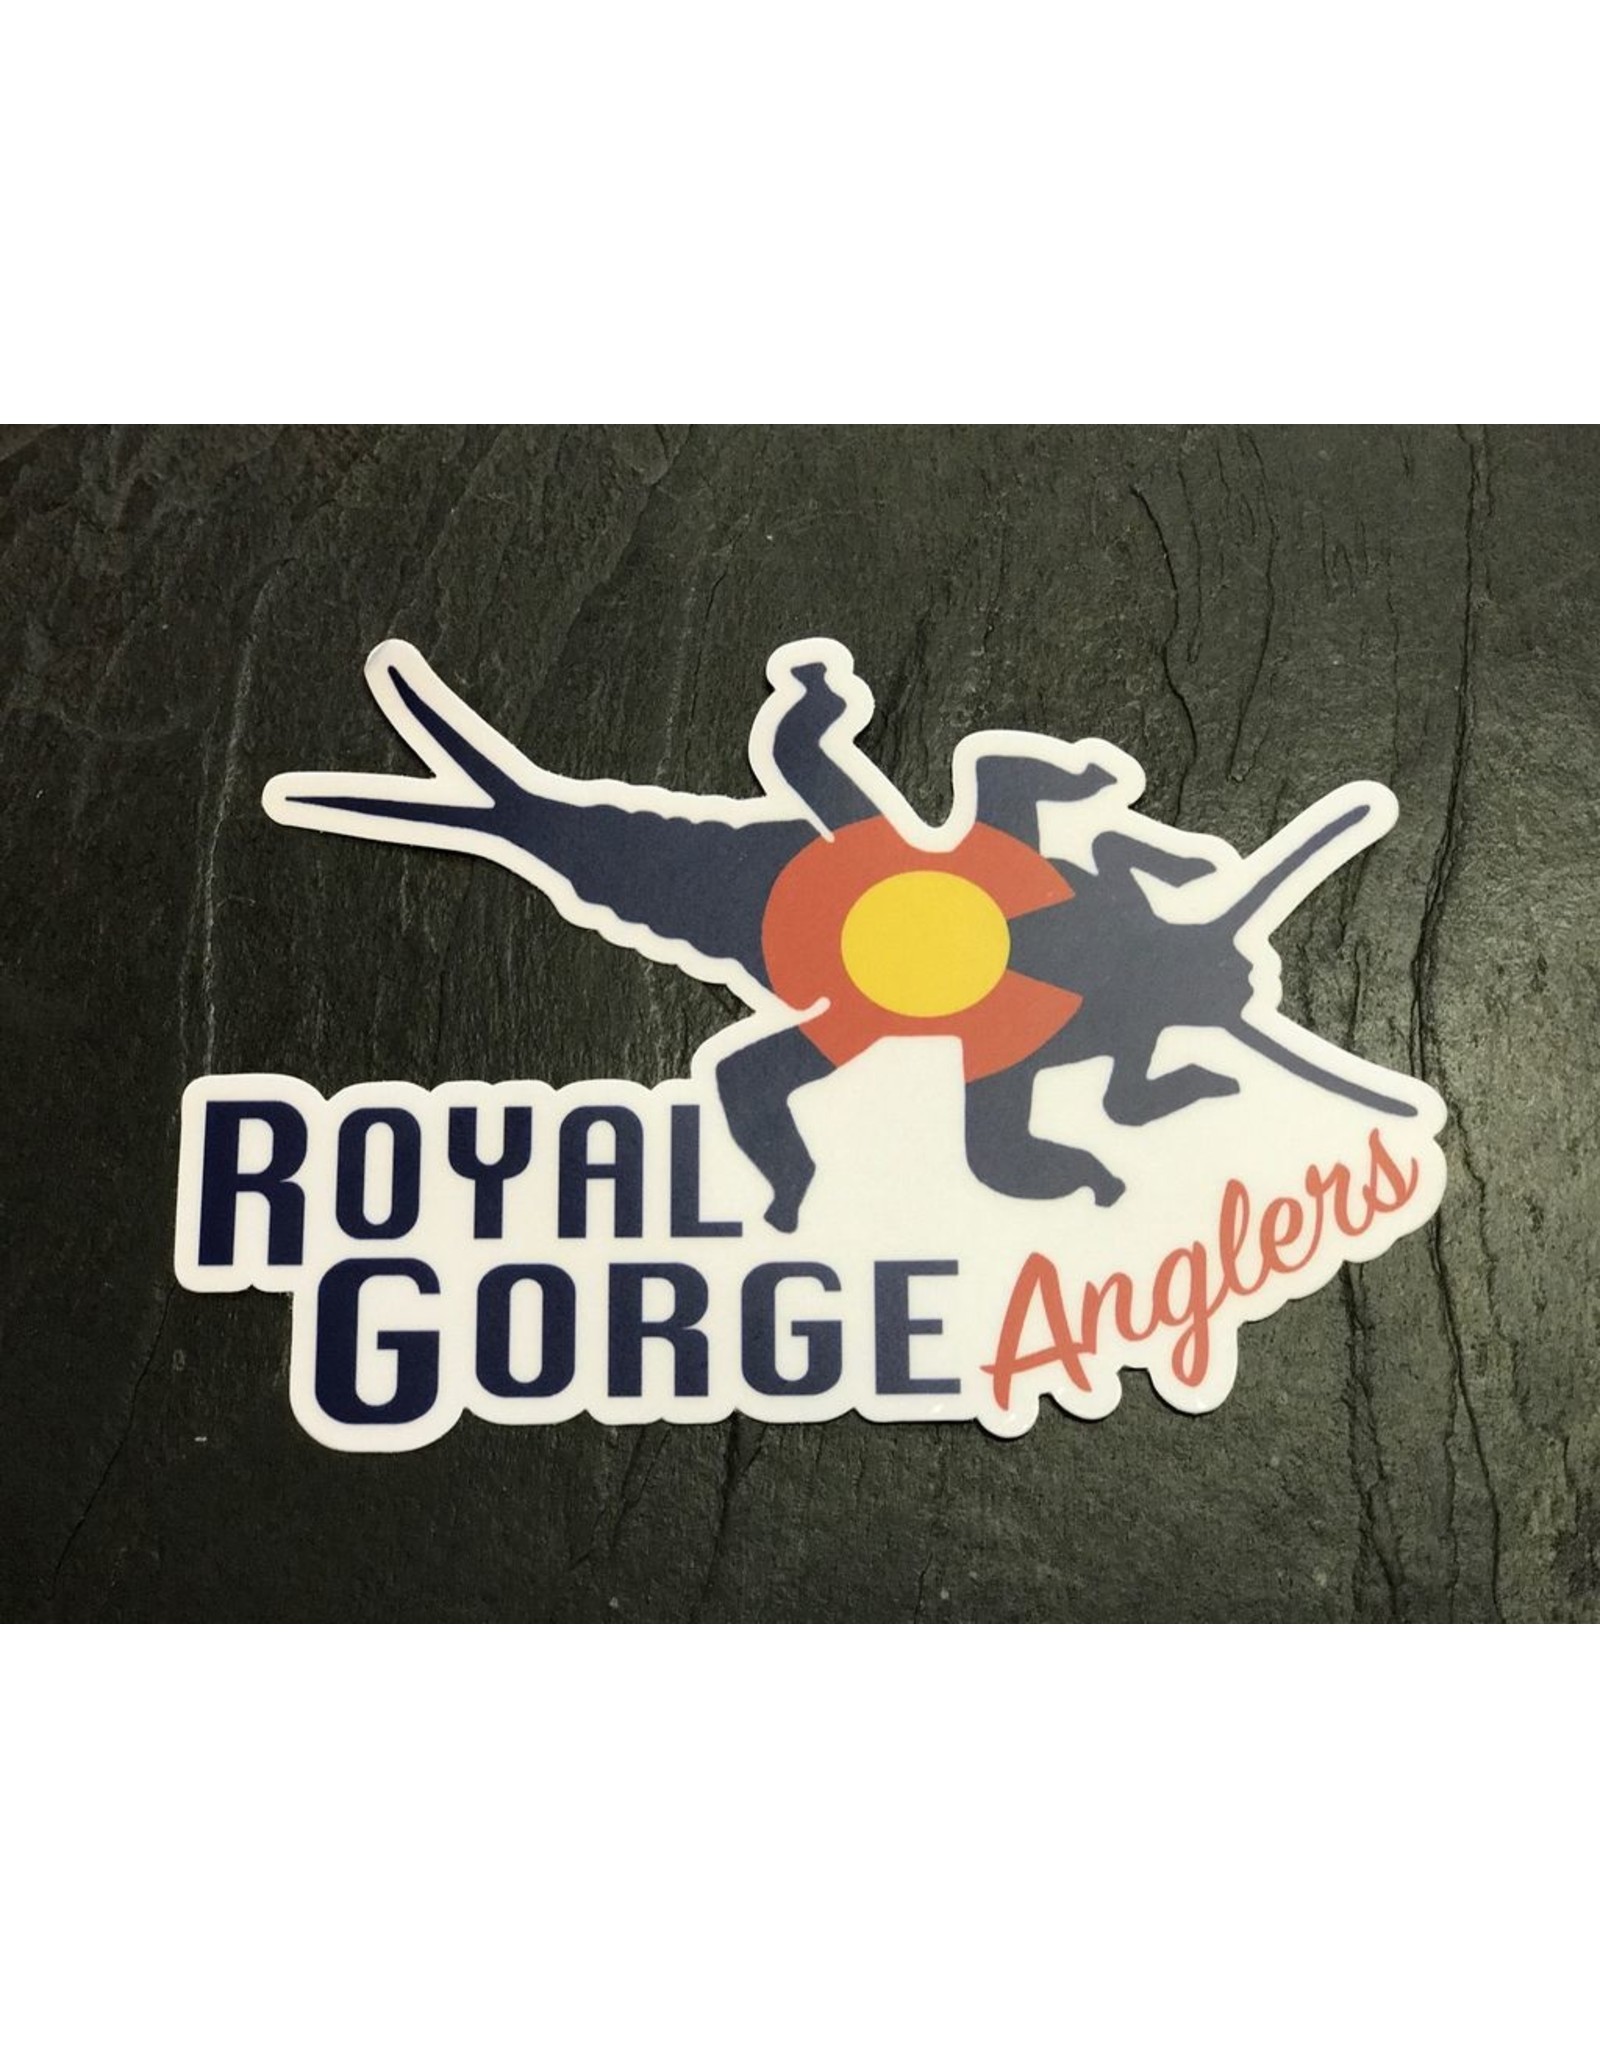 Royal Gorge Anglers Fly Fishing Adventure Company Sticker